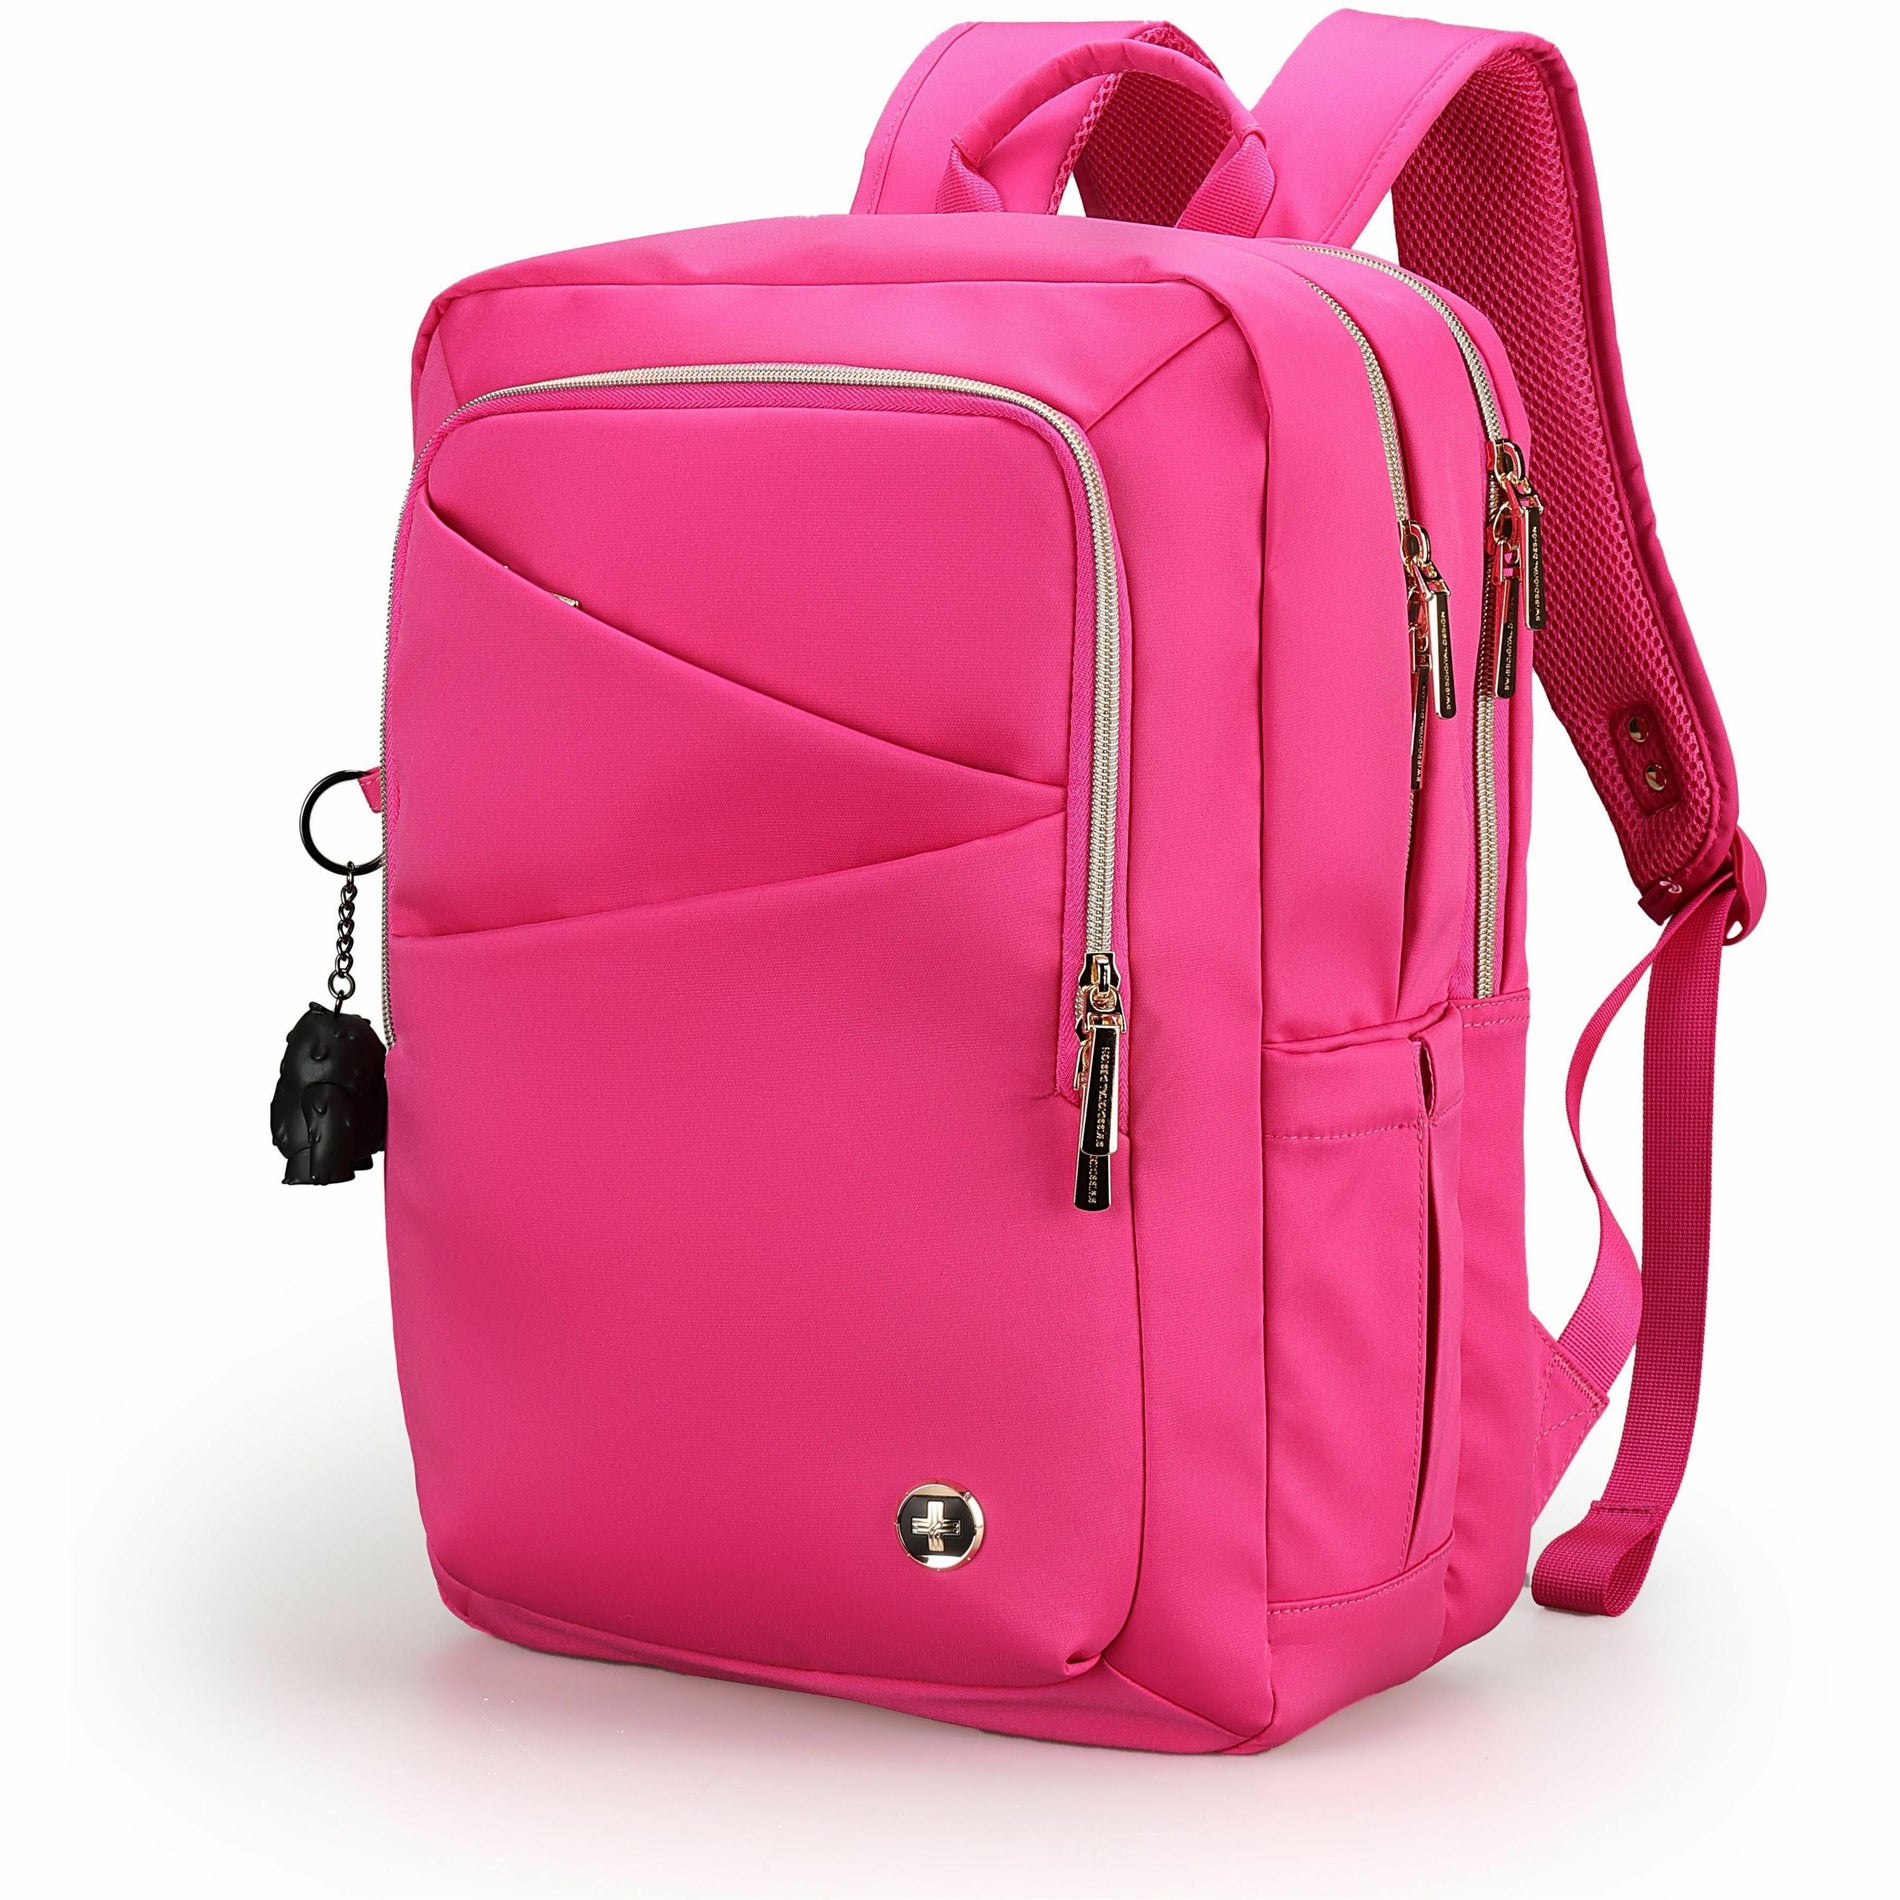 Swissdigital Design SD1645-46 Tablet Case, Katy Rose Fabric Backpack with Shoulder Strap and Luggage Strap